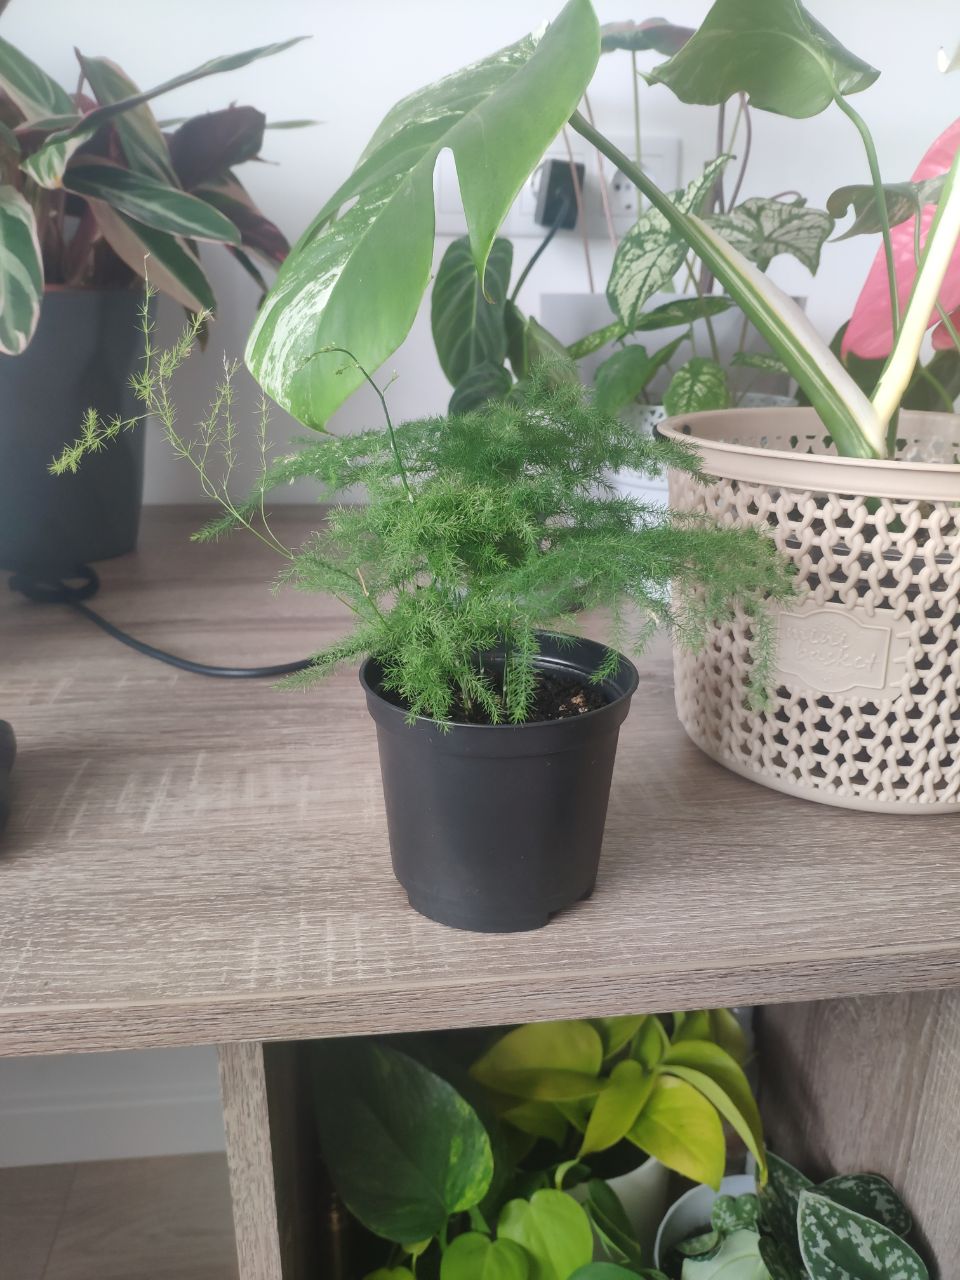 The cute little fern sits in the new home